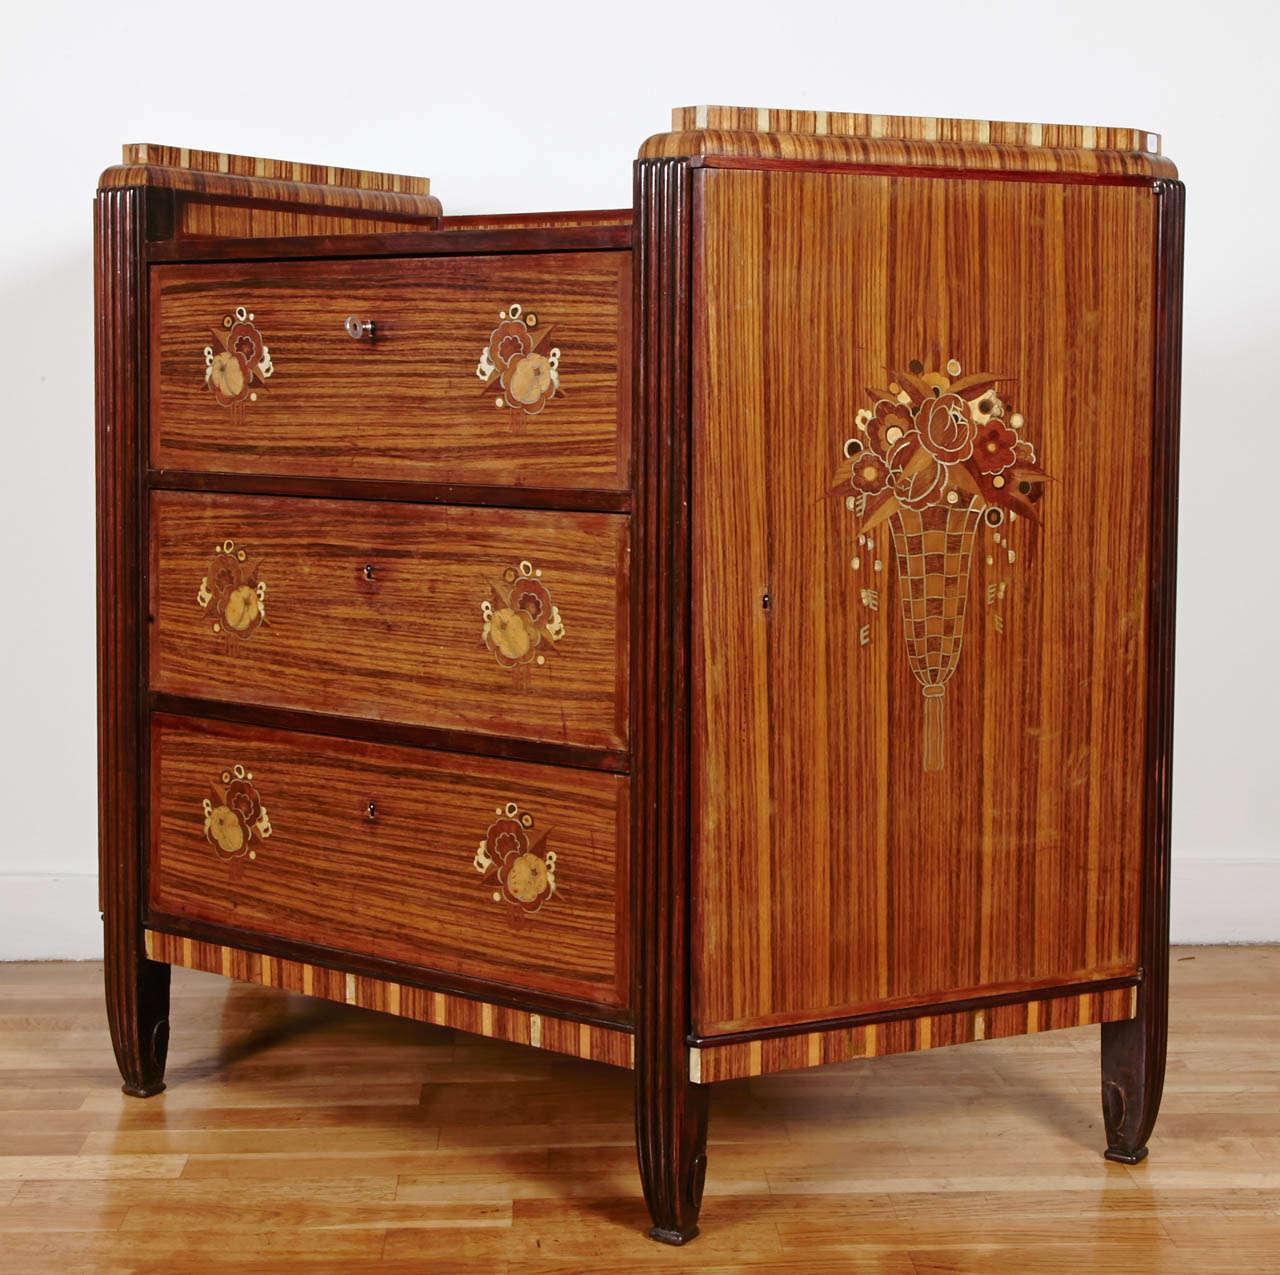 1925's rosewood veneer commode with three front drawers adorned with stylized floral motives in exotic woods and metal. On both sides of the central body the two doors are adorned with center motive of a vase of plenty. A rosewood and ivorine spine